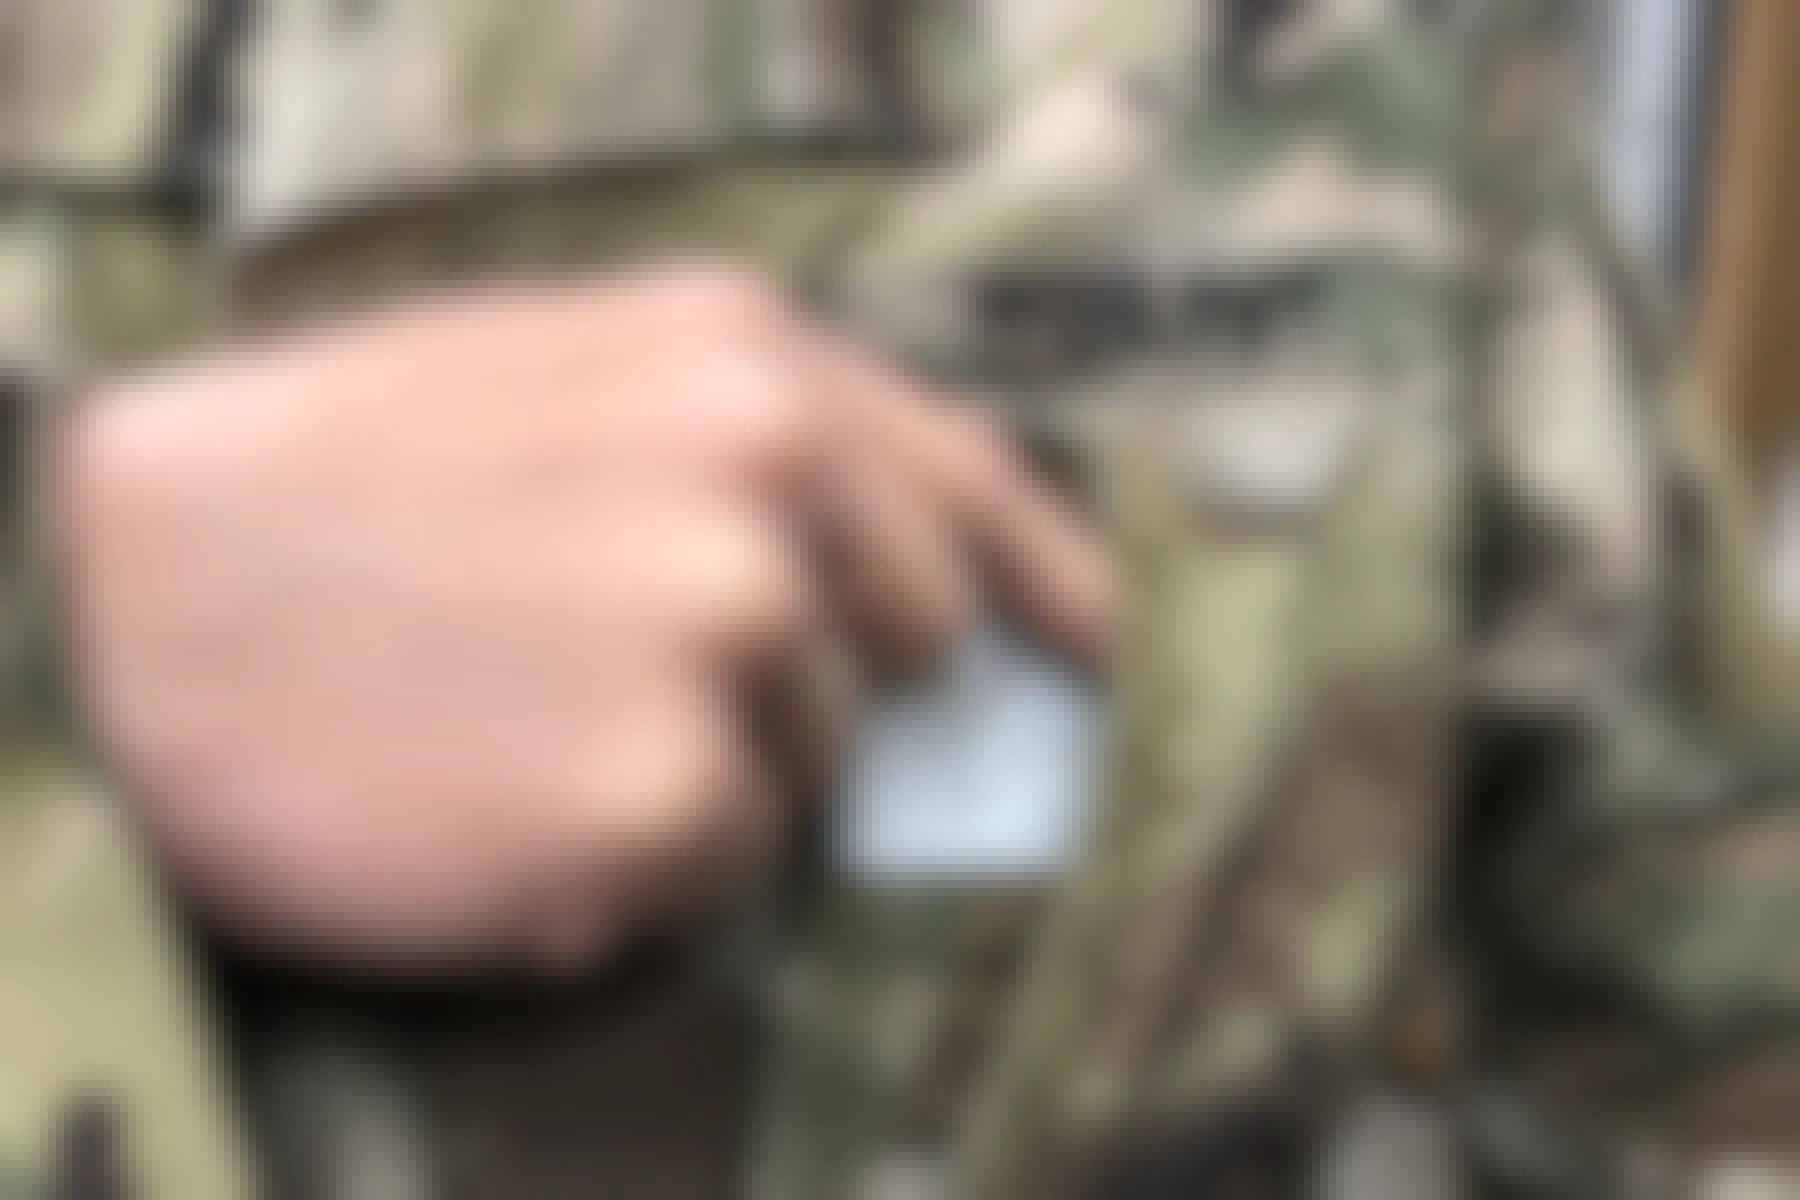 A person in US Army fatigues pulling a military ID from their front shirt pocket.